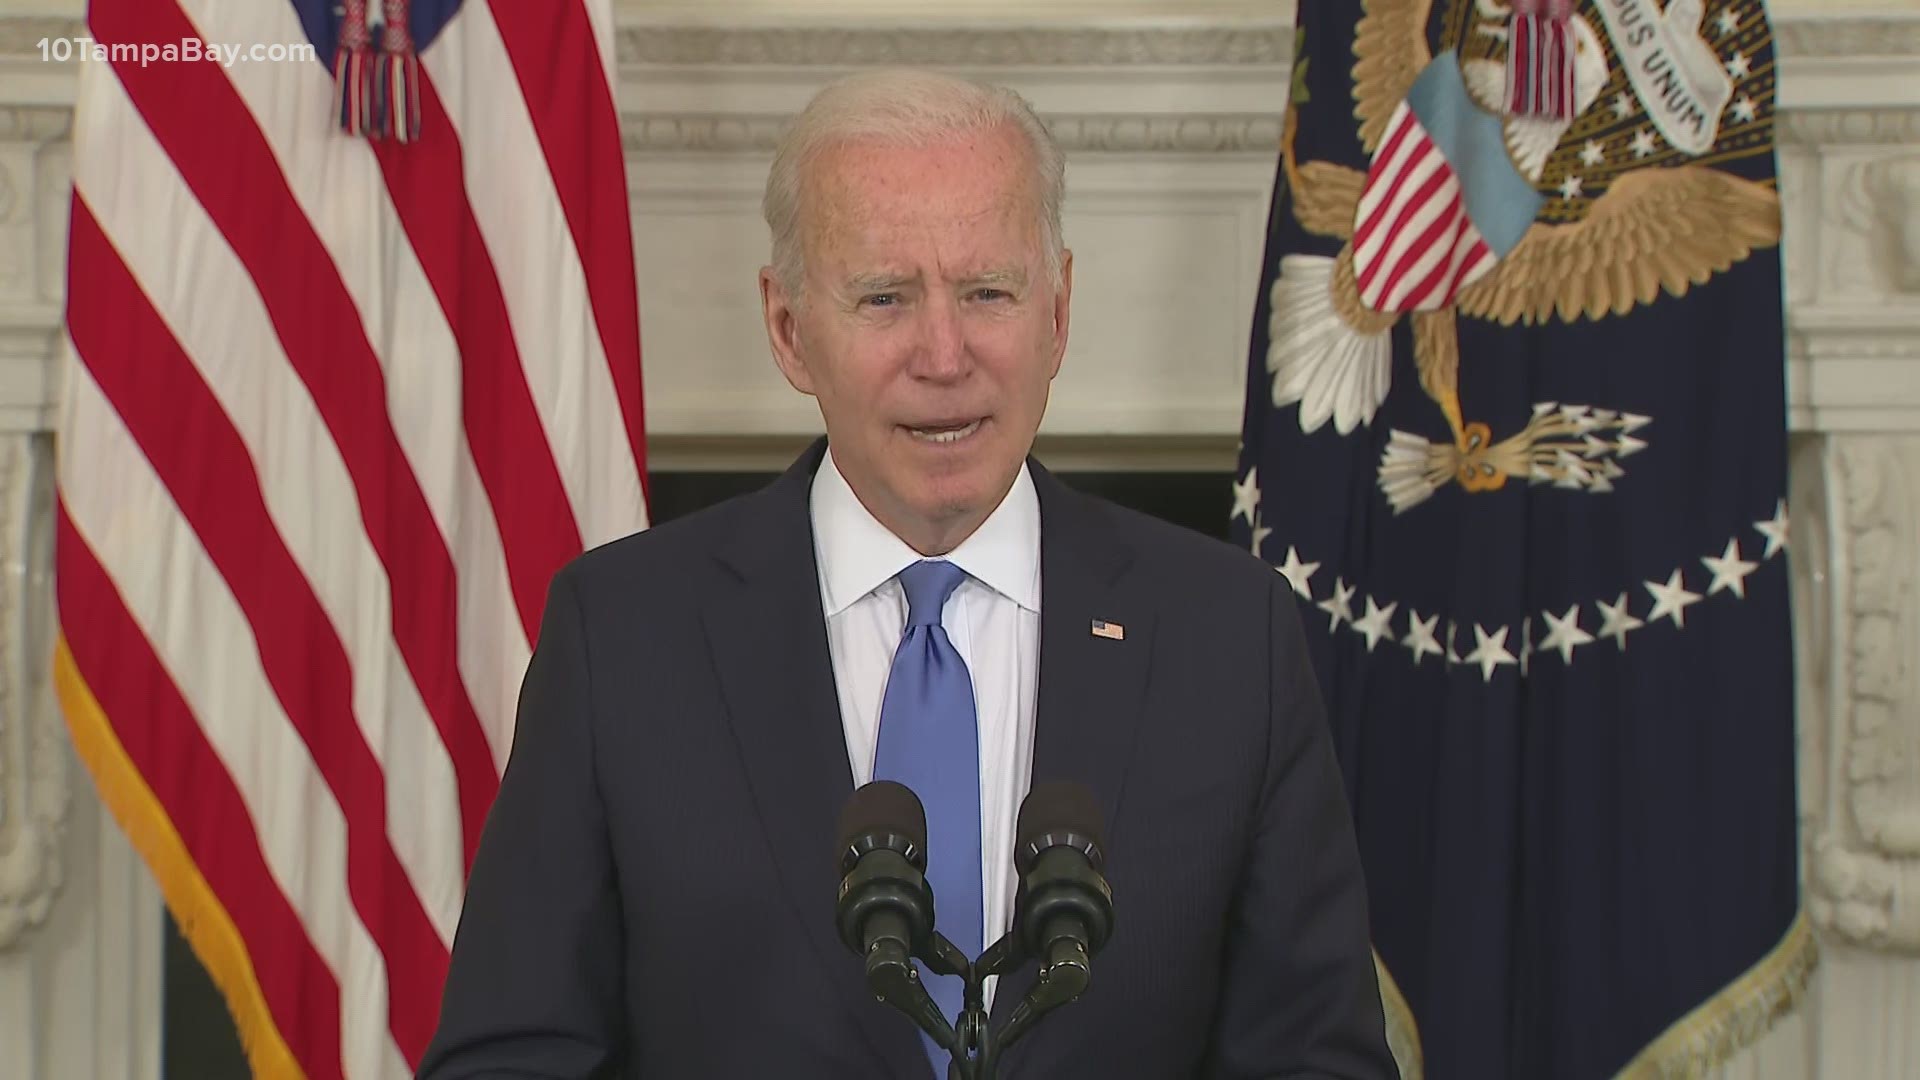 Restaurants who receive grants can use the money for whatever they need to reopen and stay open, according to President Biden.